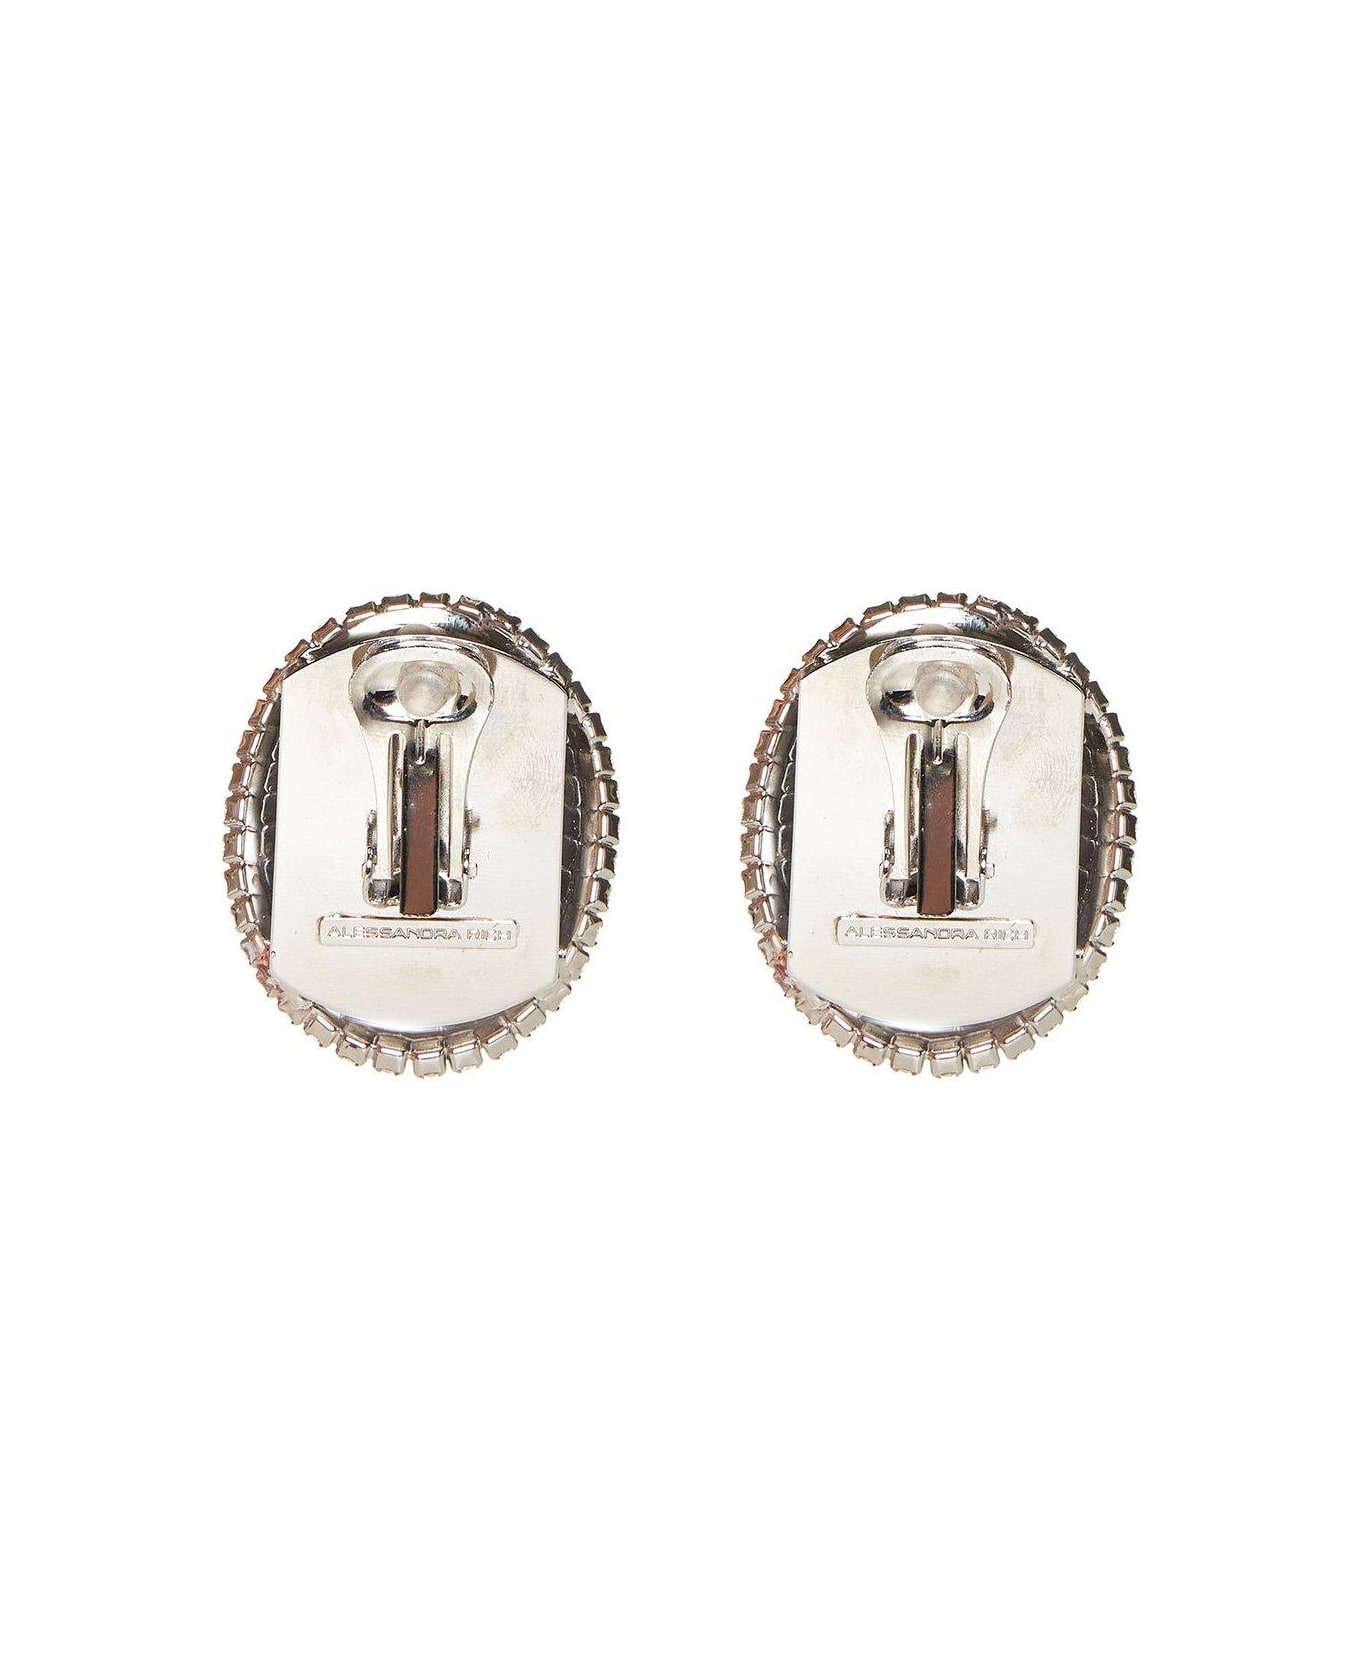 Alessandra Rich Embellished Clip-on Earrings - Cry Silver イヤリング